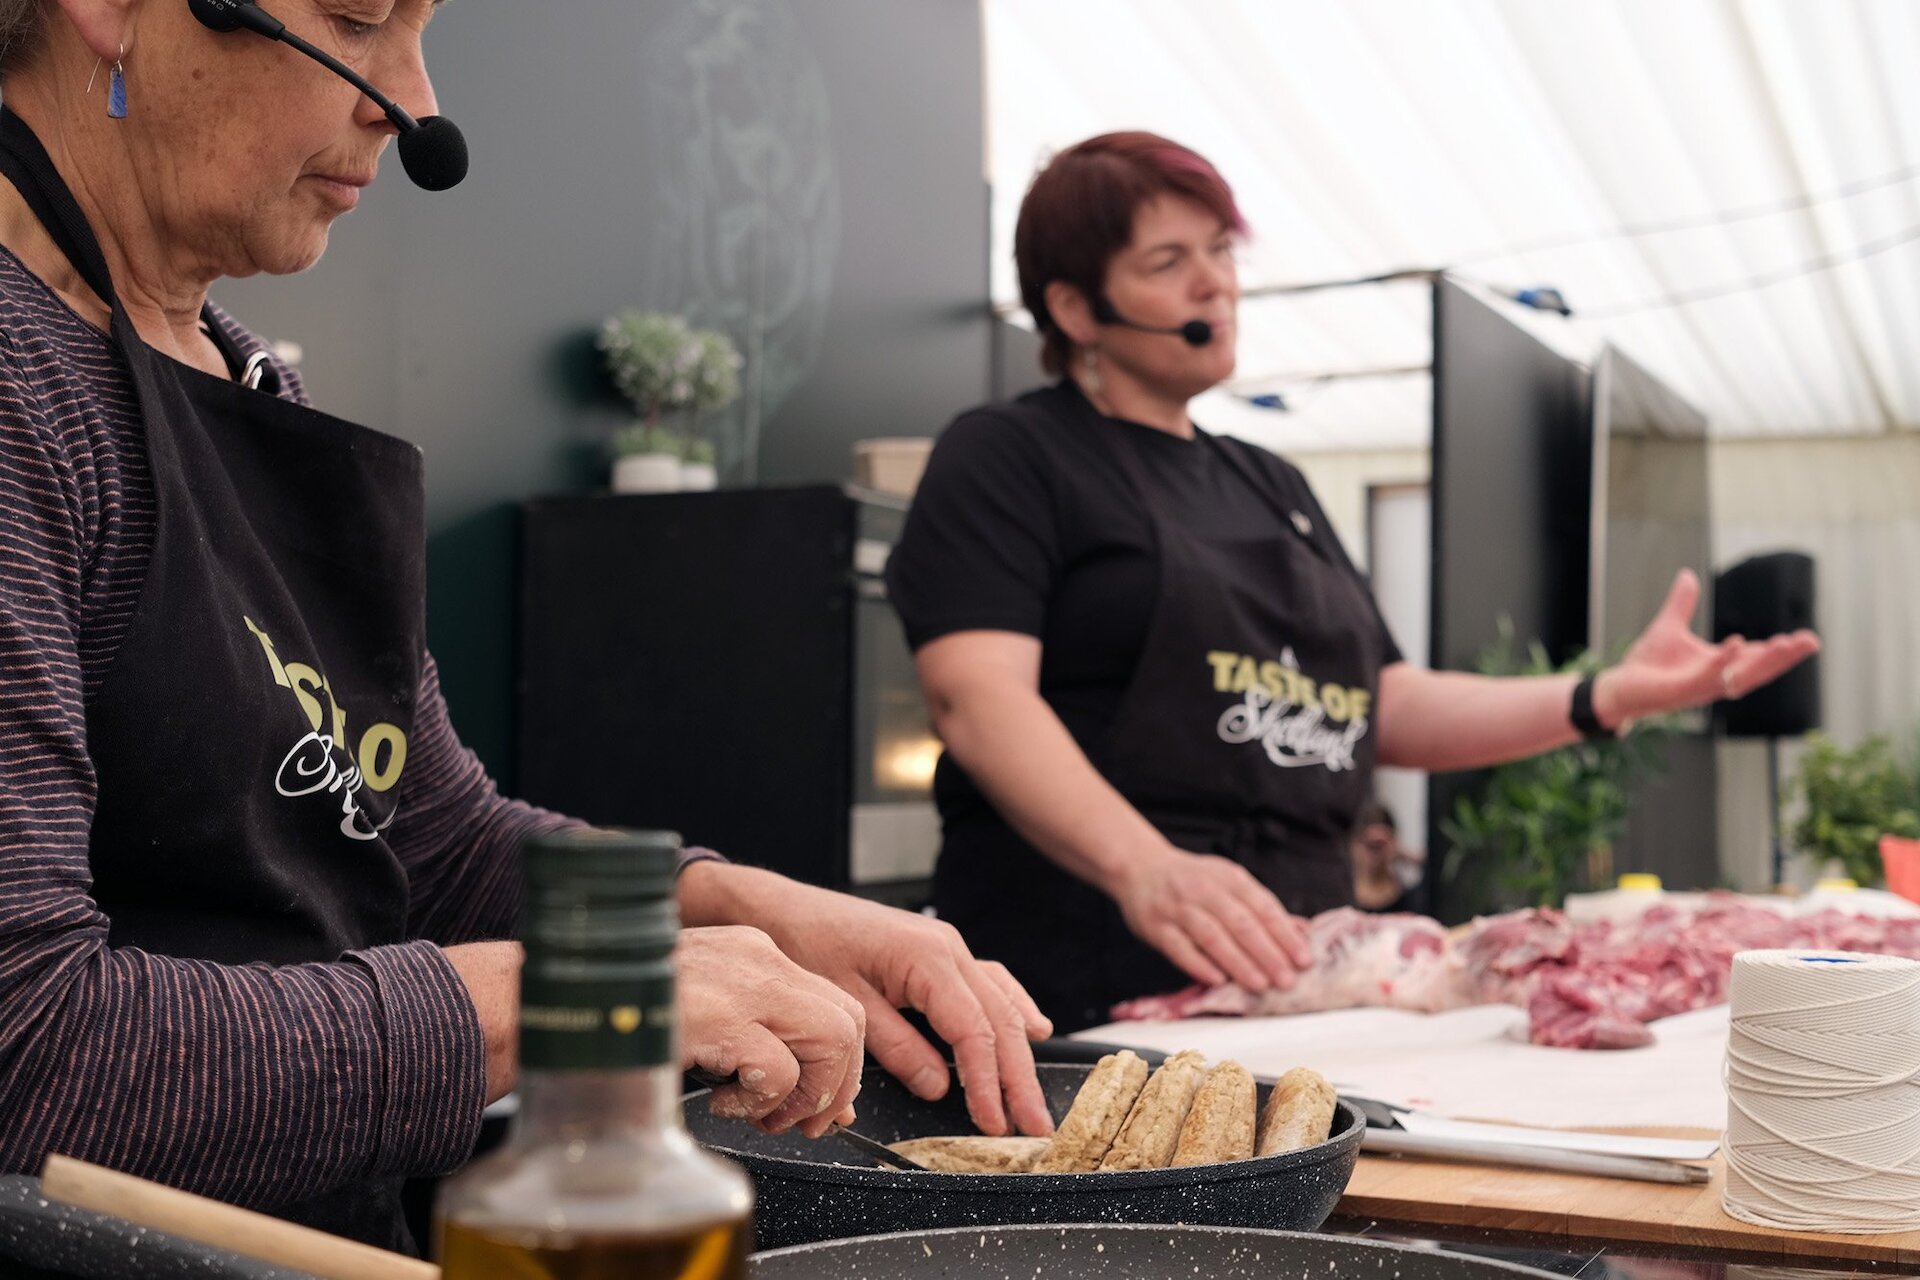 Marian Armitage and Lauraine Manson demonstrate how to debone a lamb without cutting it up into joints. Photo courtesy of Taste of Shetland.